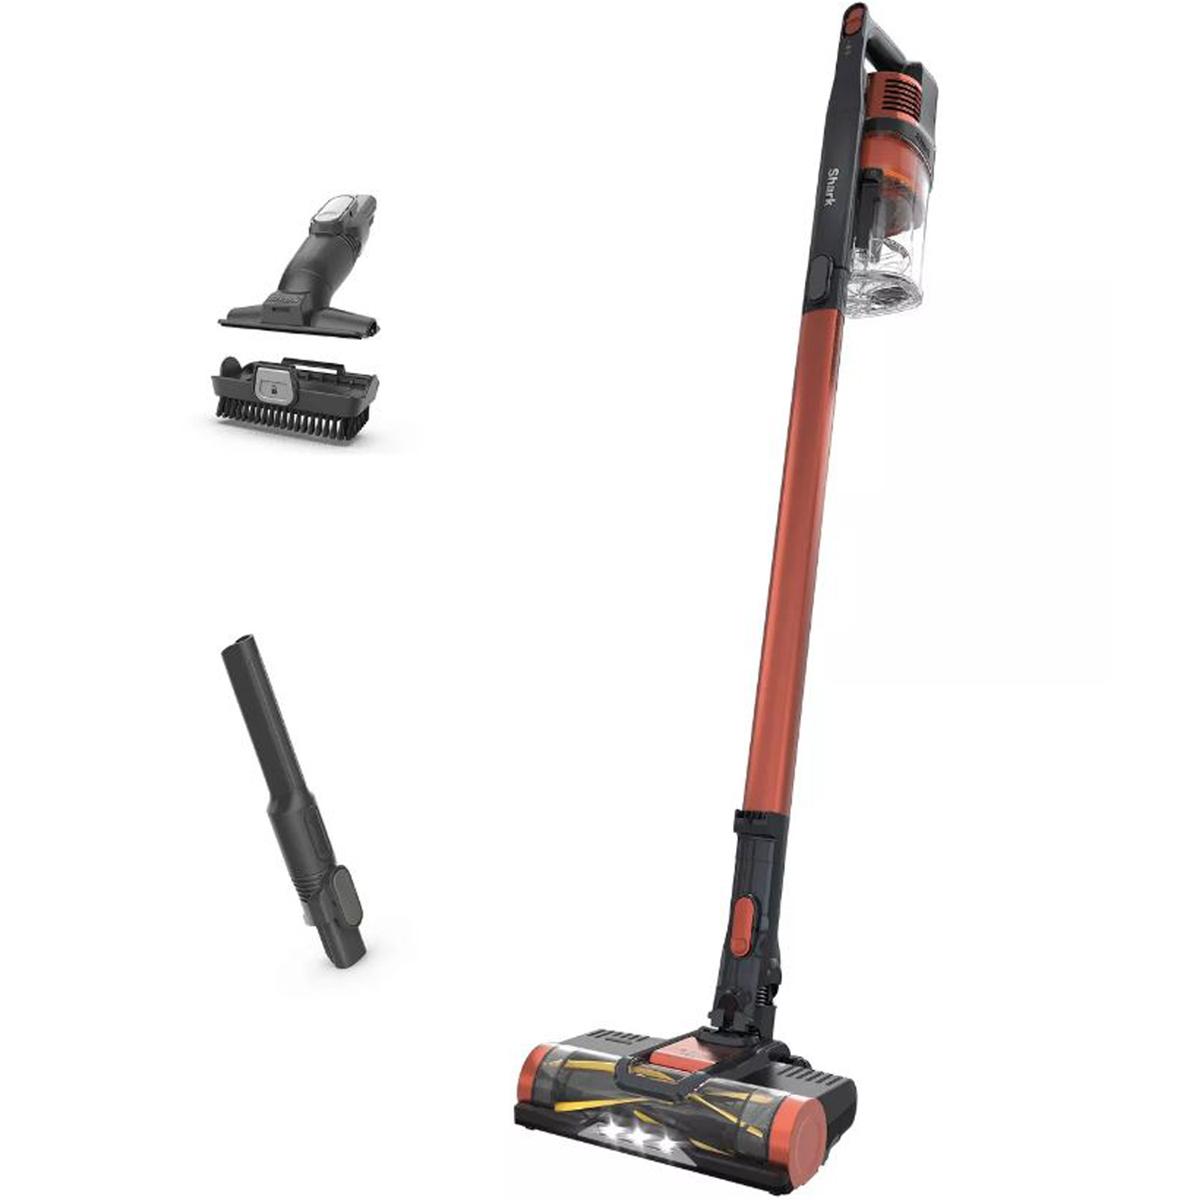 Shark Pet Pro Cordless Vacuum with Self Cleaning Brush Roll for $149 Shipped